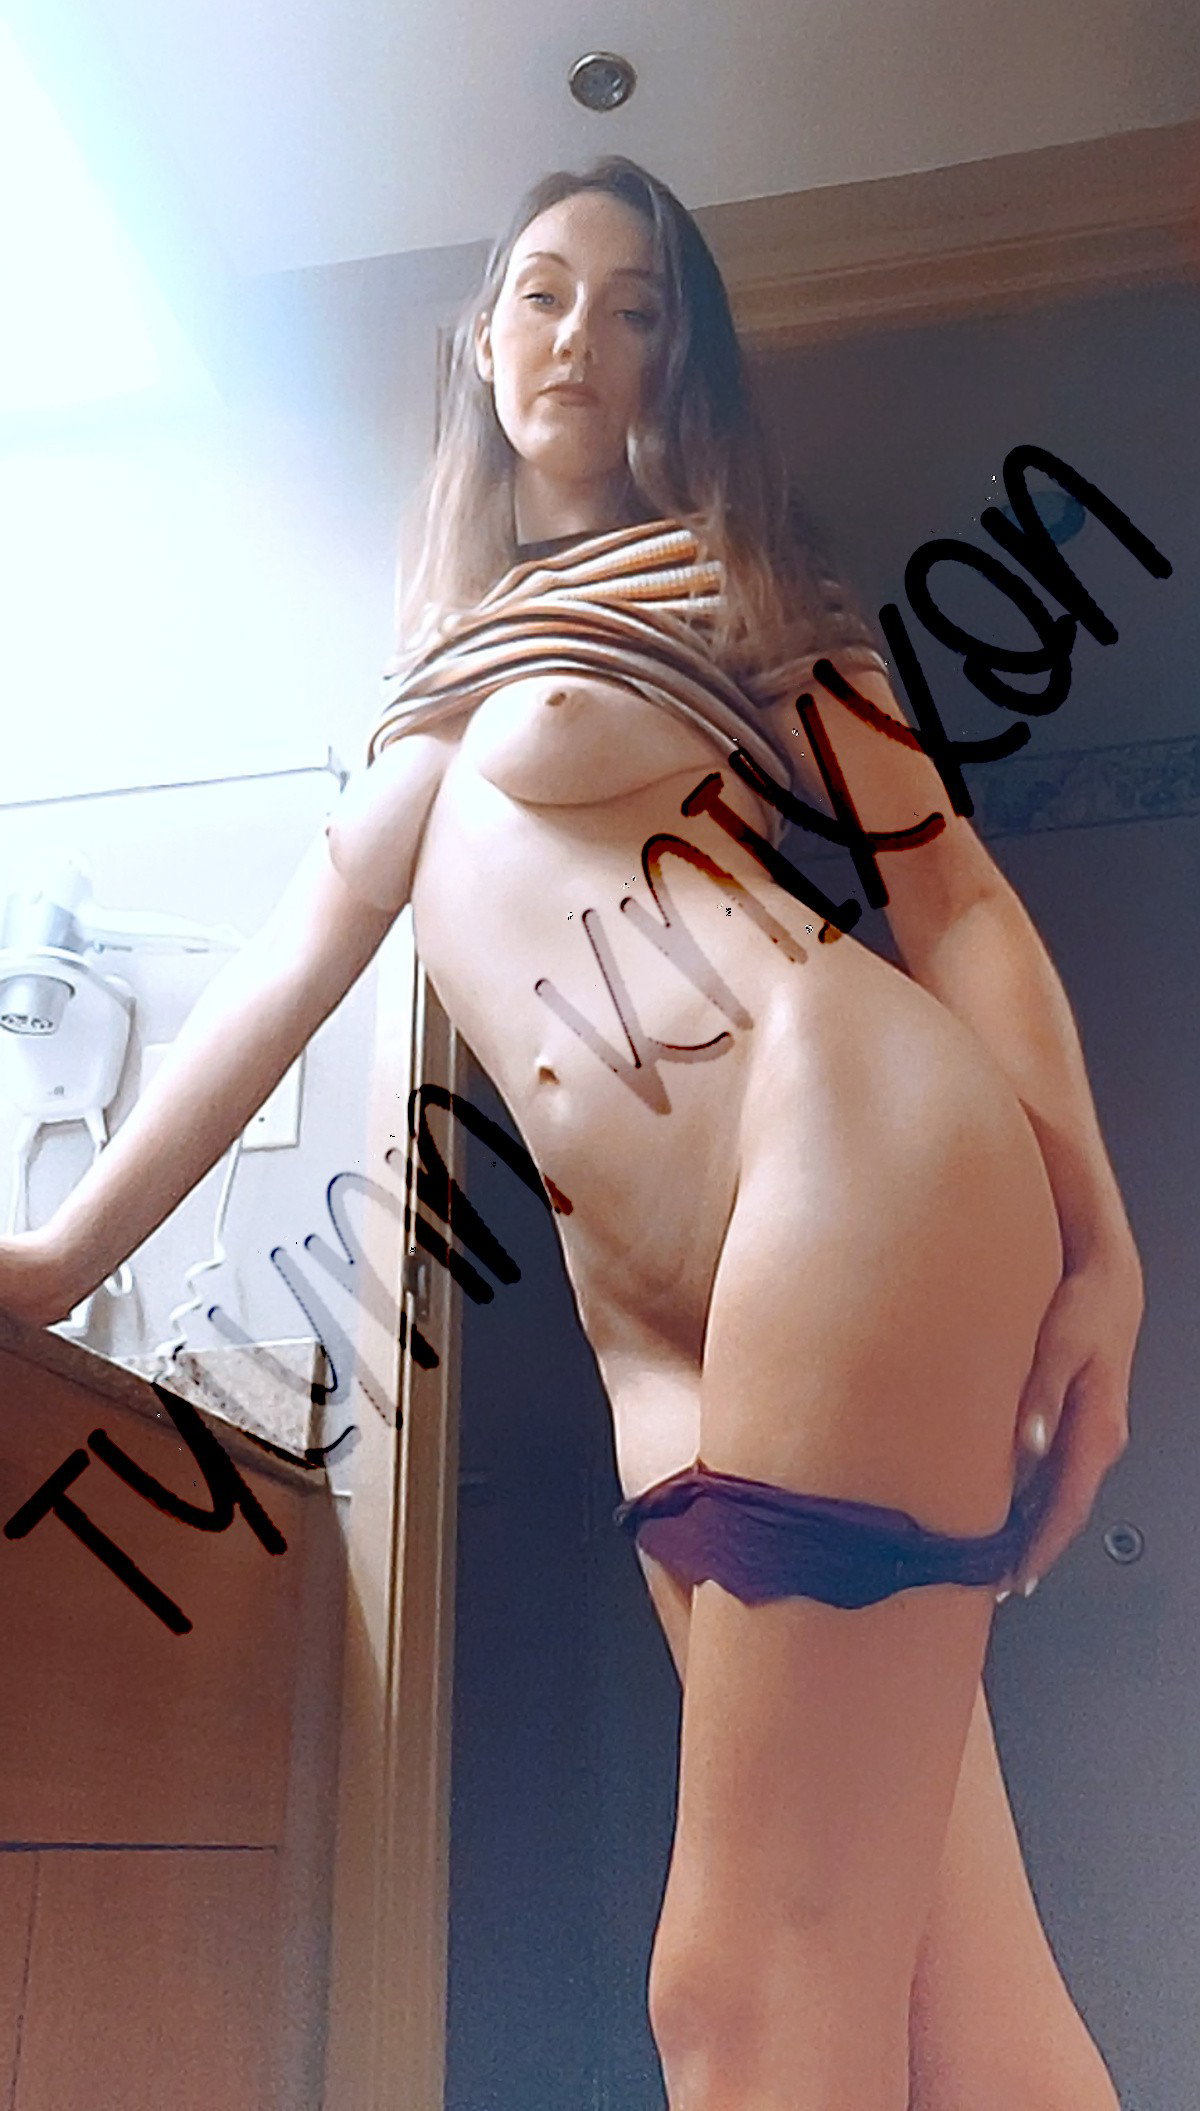 Photo by tylynn knixxon with the username @tylynnknixxon, who is a verified user,  August 31, 2020 at 11:49 AM. The post is about the topic Amateurs and the text says '#spun #brunette #petite #chaturbate #drugs #smoke #clouds #petite #longlegs #bigtits #tightass #camgirl #snapchat #perky #blowclouds #realmaateur #pornhub #tylynnknixxon #follow #follow4follow'